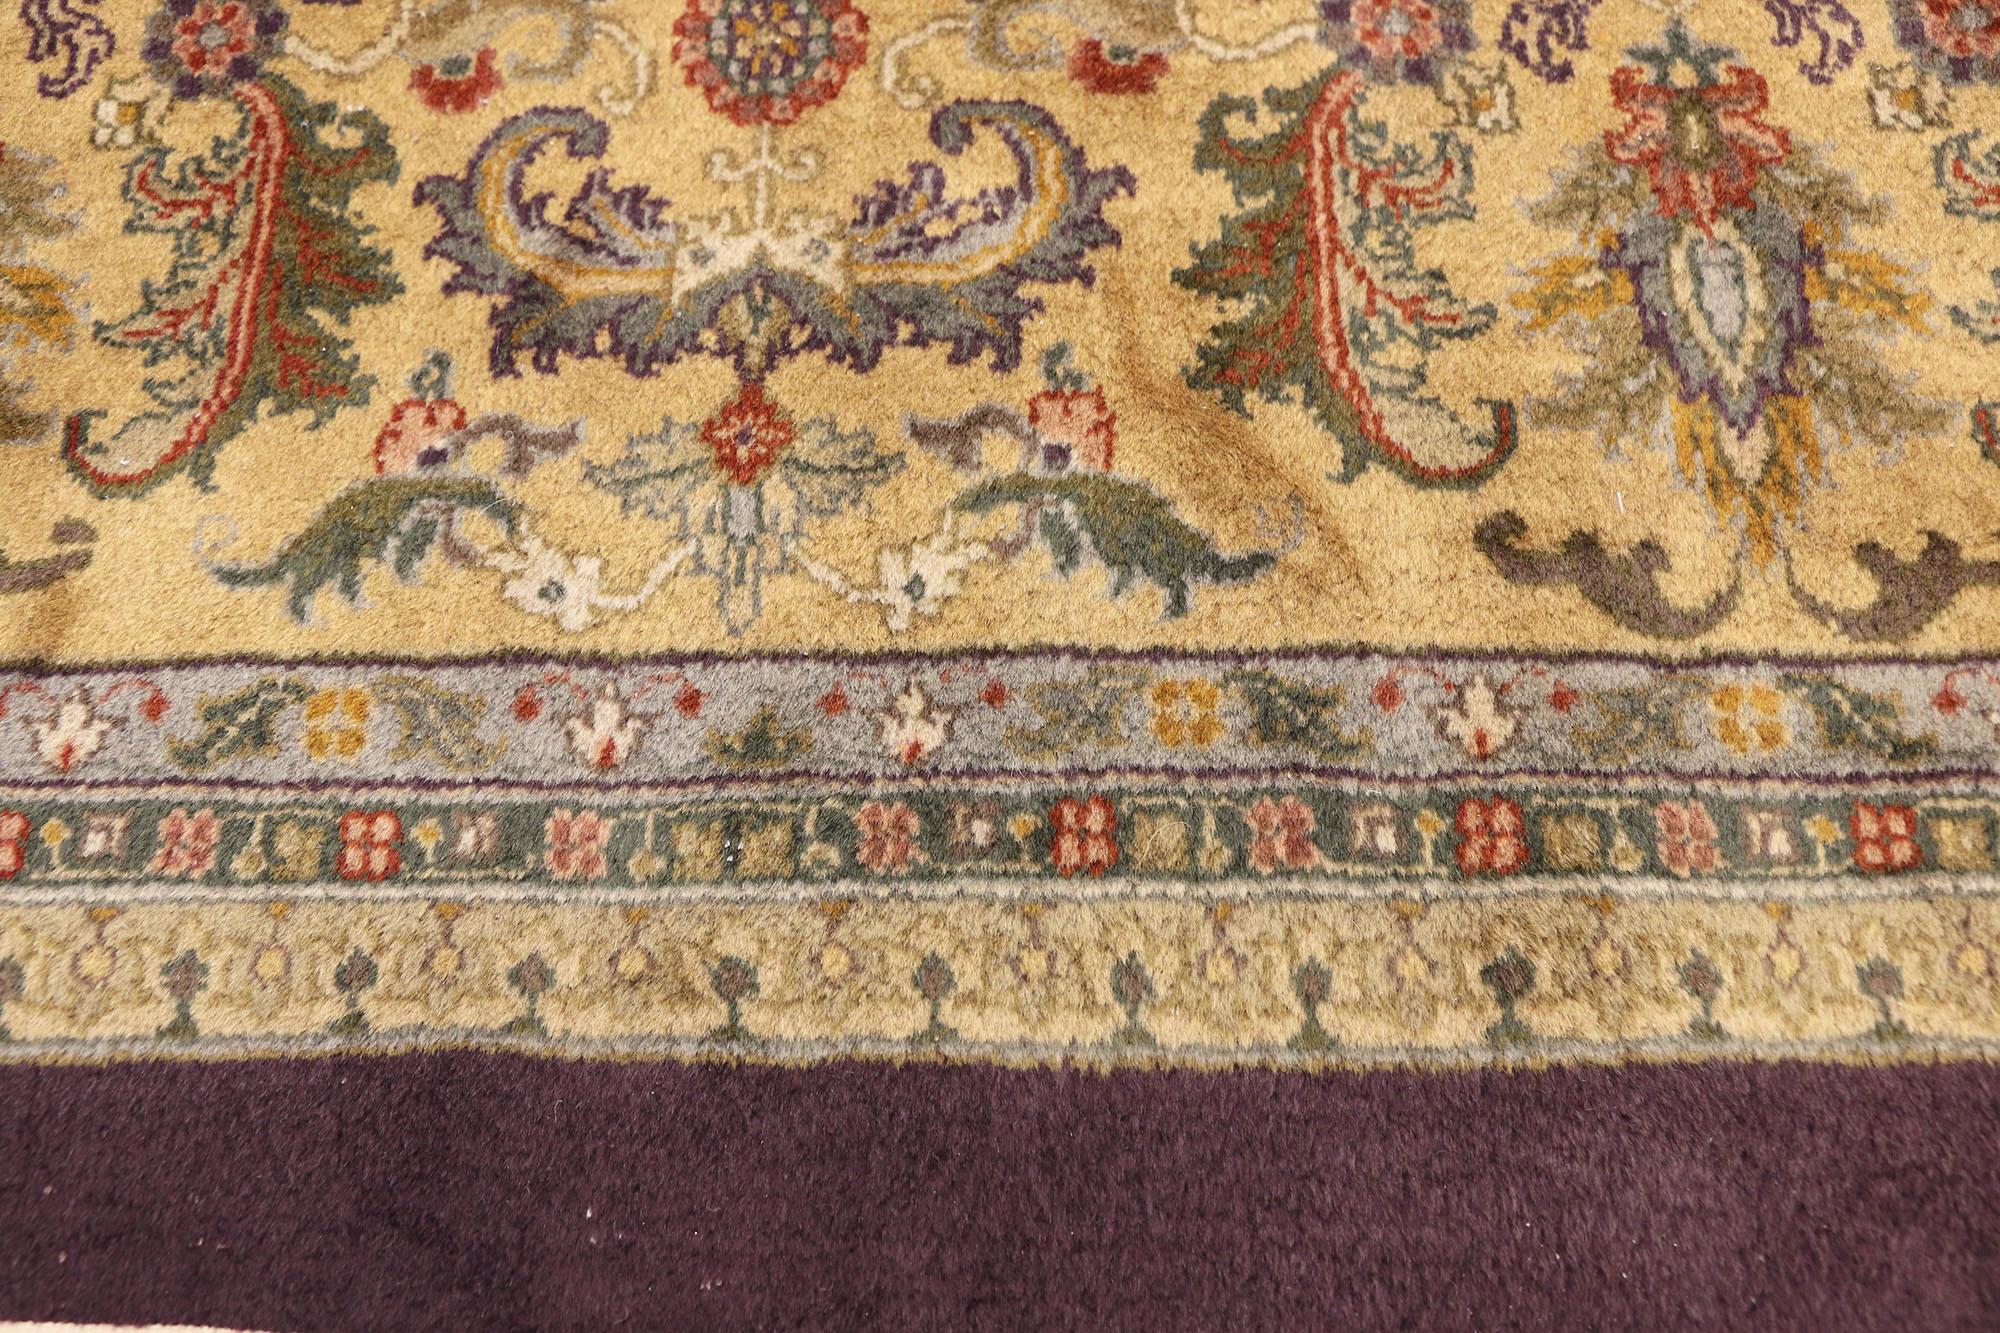 Vintage Aubergine Indian Palatial Carpet, 11'03 x 17'08 In Good Condition For Sale In Dallas, TX